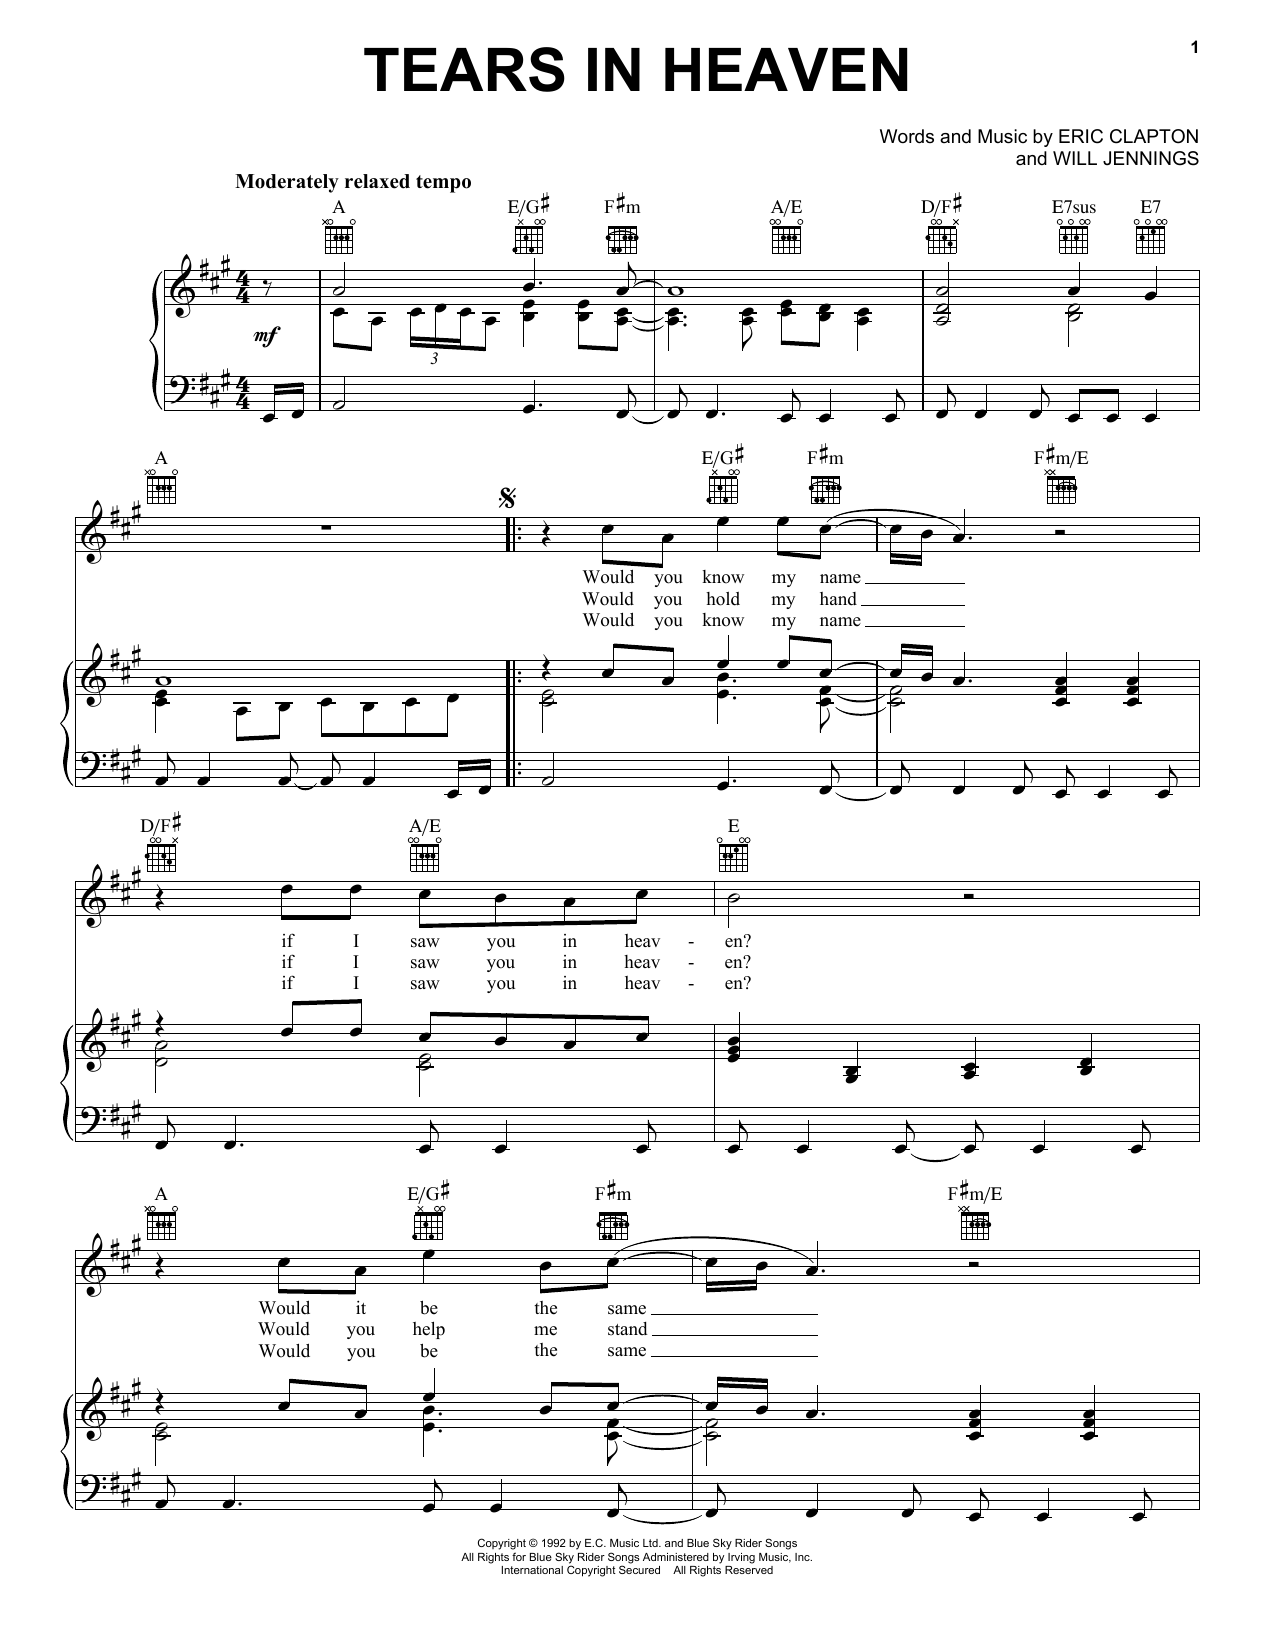 Eric Clapton Tears In Heaven sheet music notes and chords. Download Printable PDF.